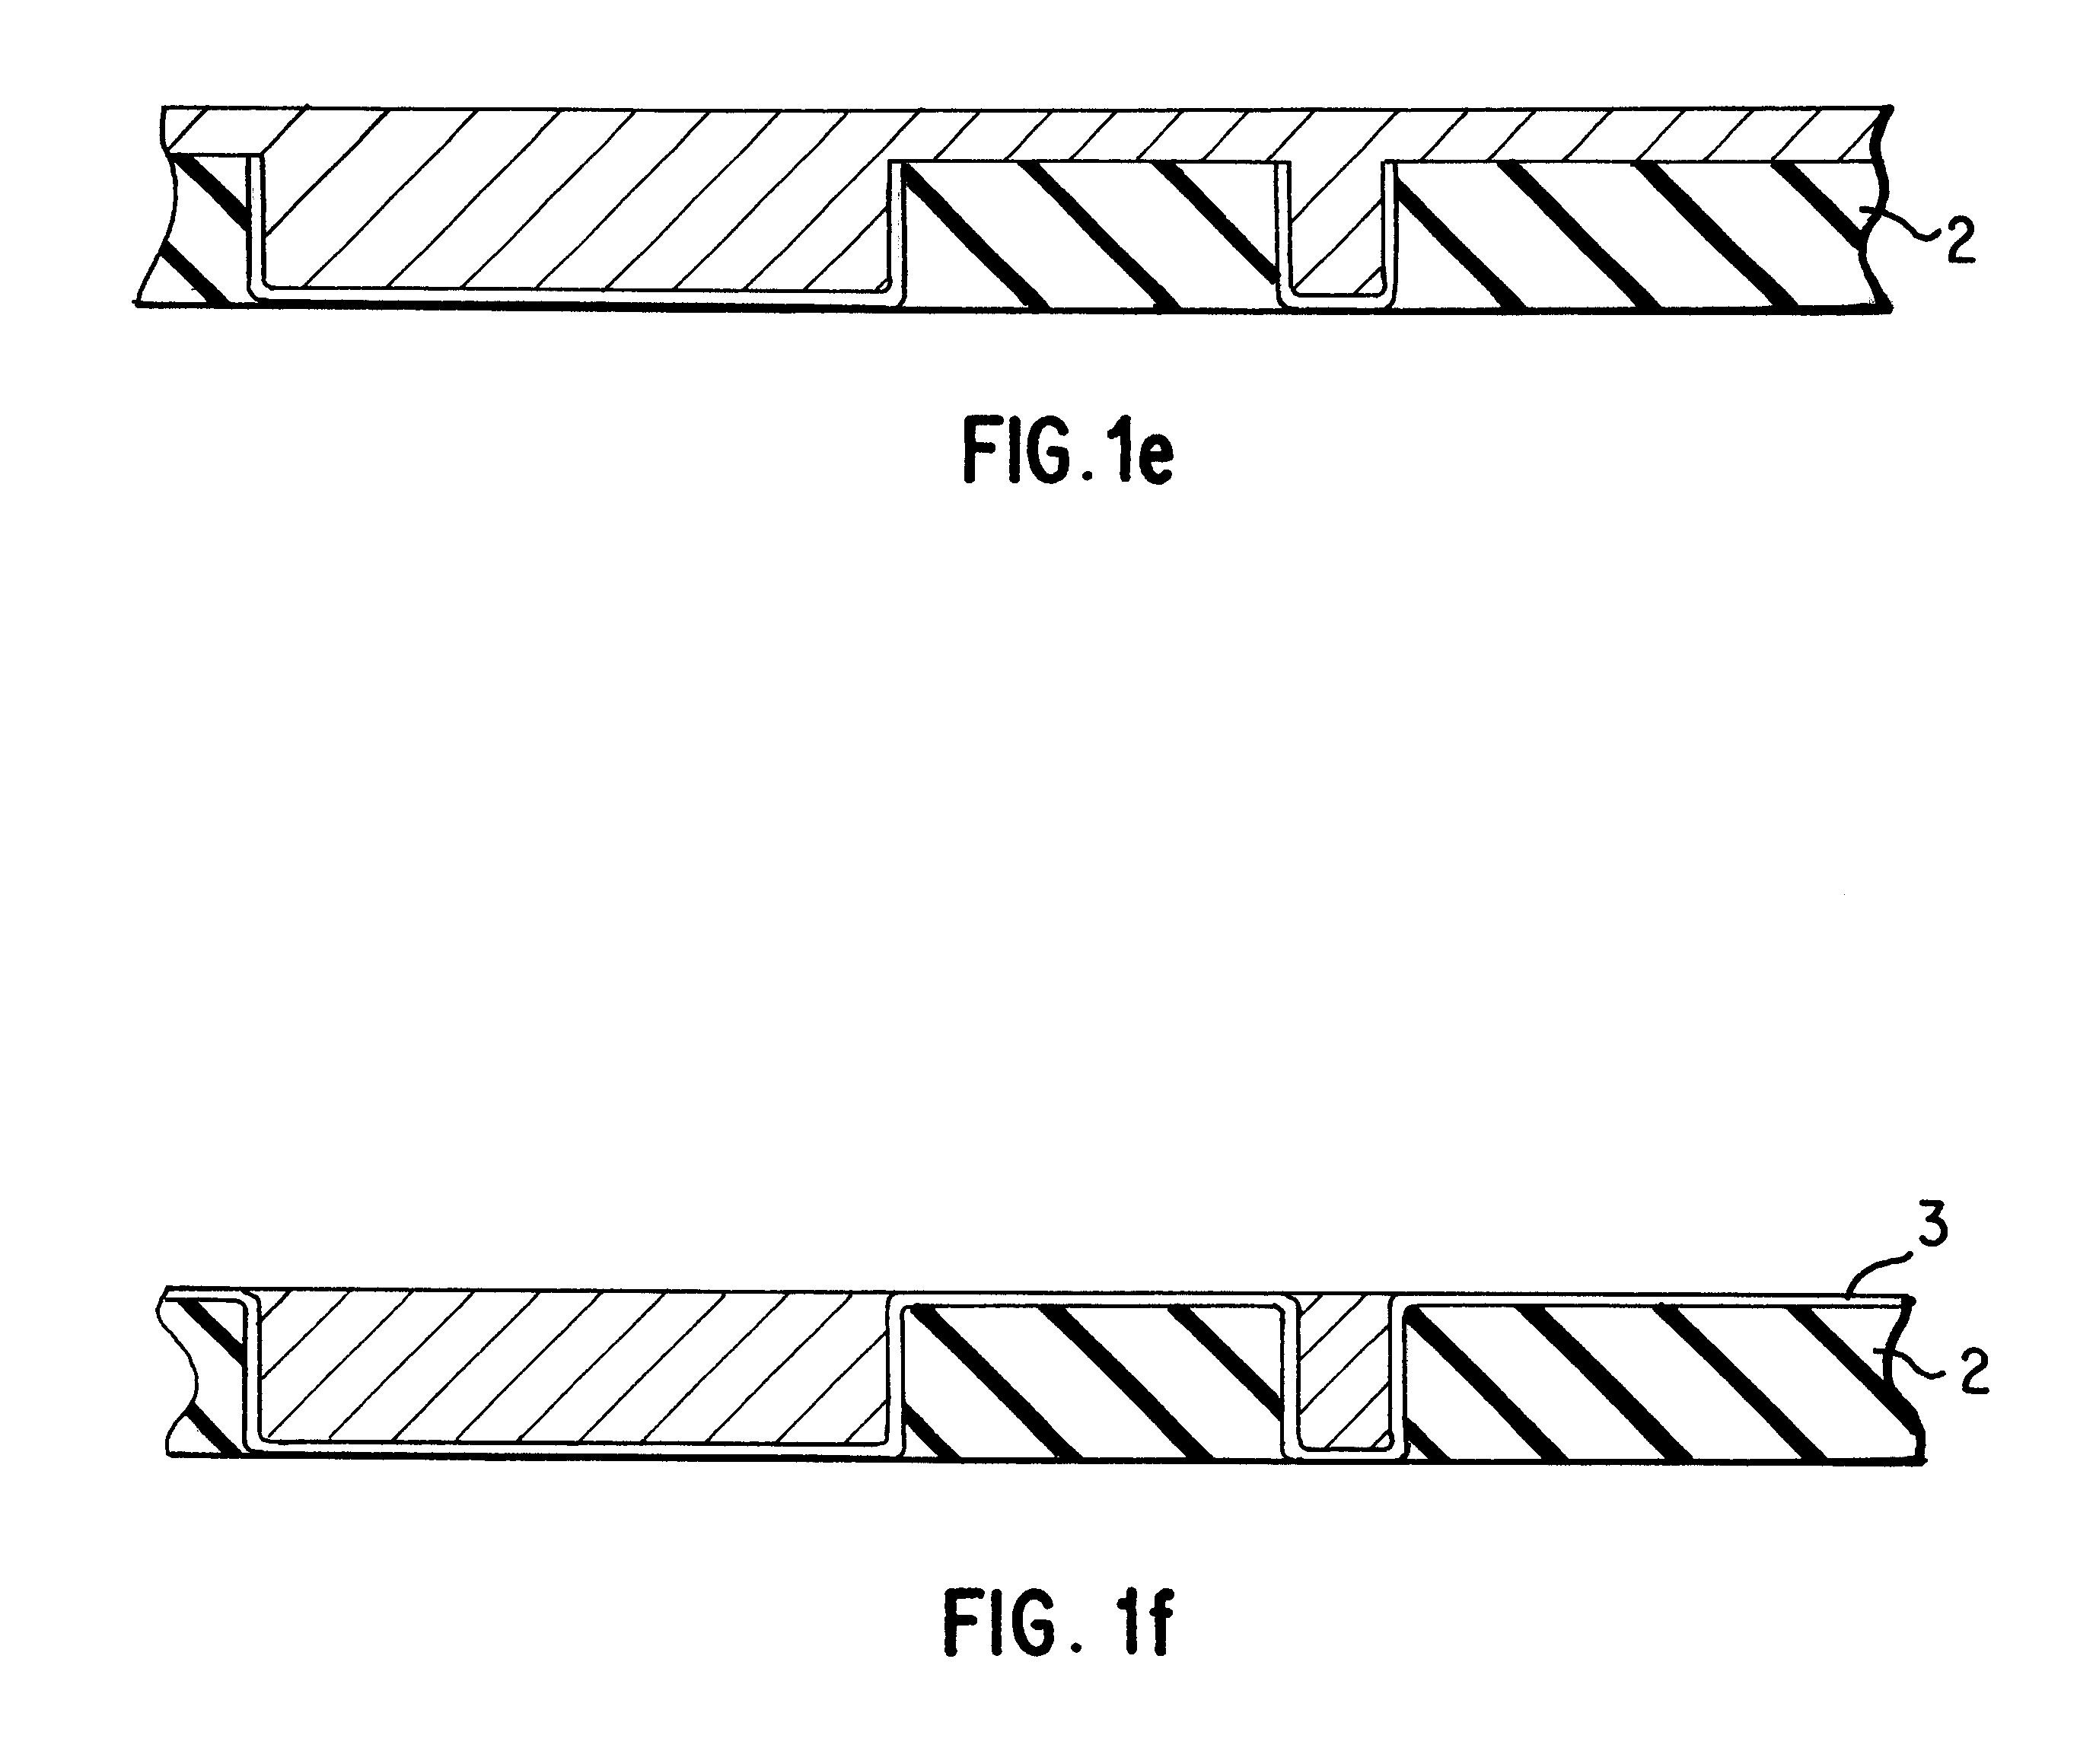 Modified plating solution for plating and planarization and process utilizing same